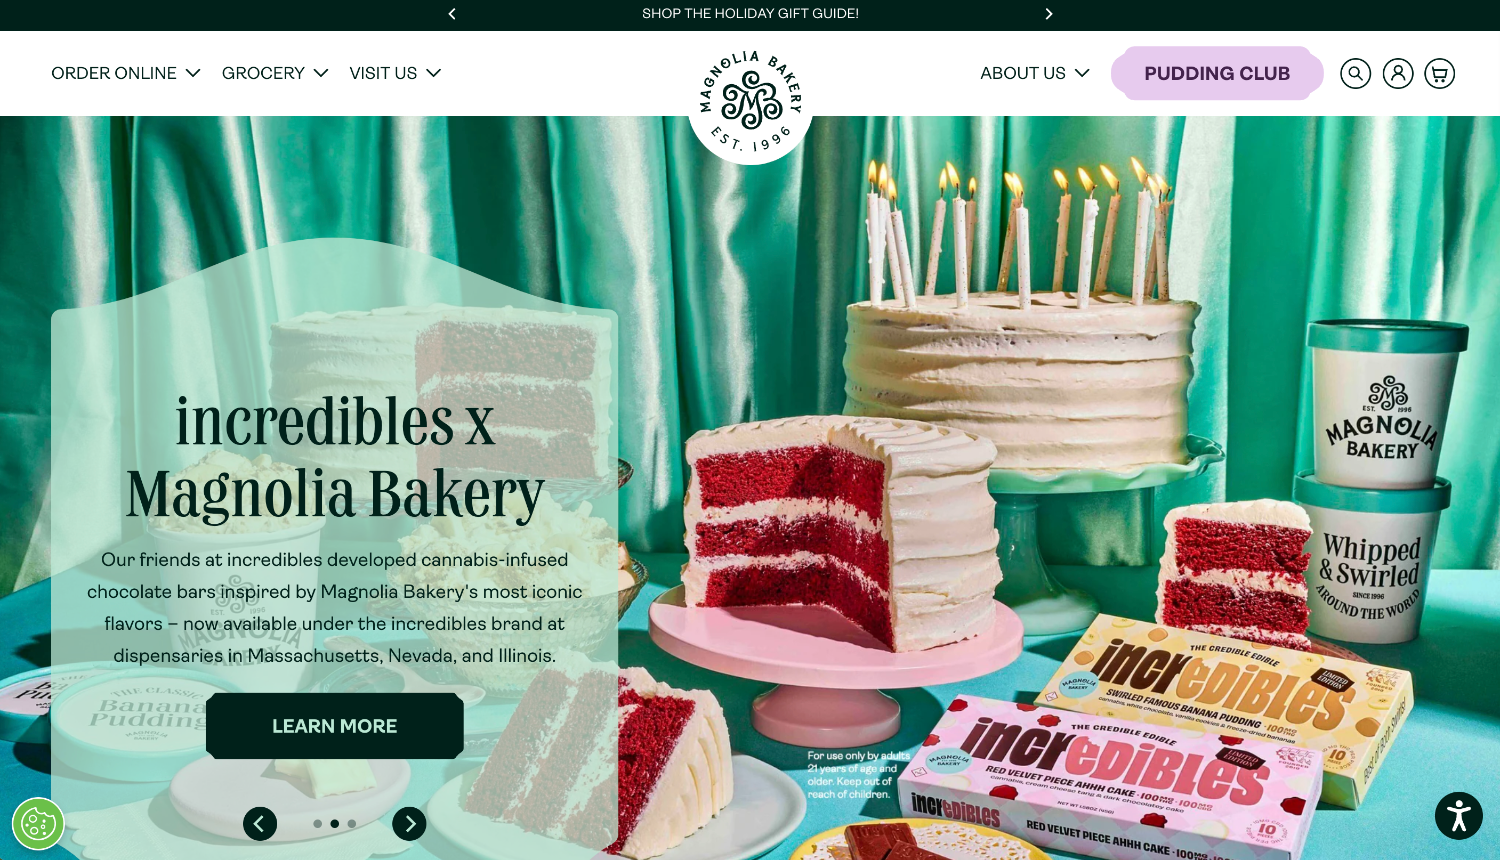 Homepage for the ecommerce website of brand Magnolia Bakery